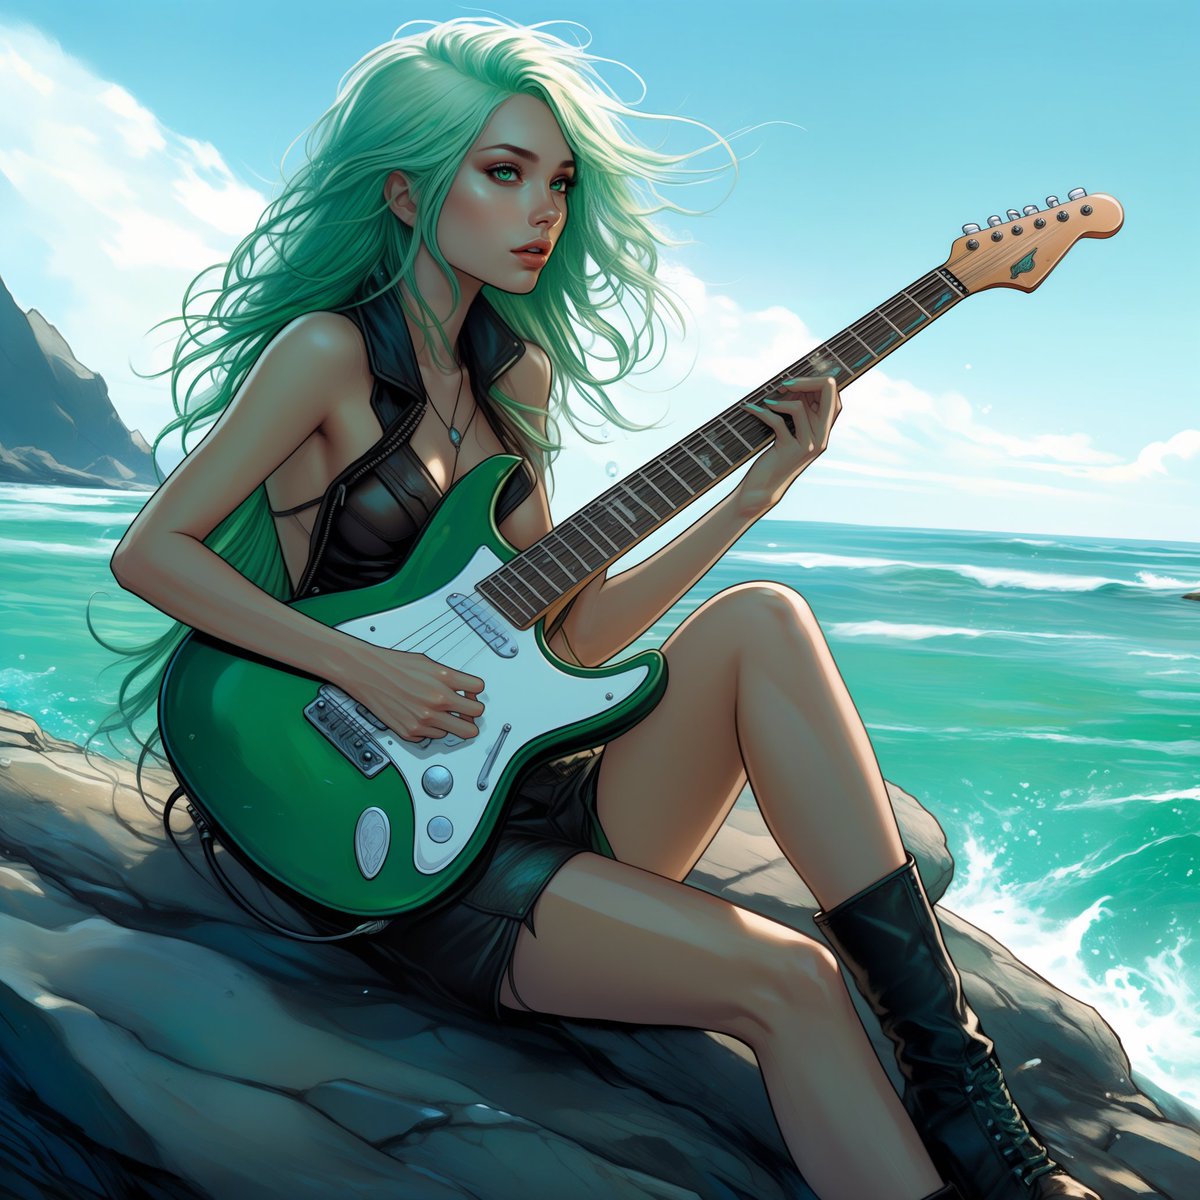 She strums a melody, her eyes closed, as the sun rises on the horizon, painting a serene sky.

Good morning!

#AIart #AIArtwork #aigirl #aiart #AIイラスト #AI美女 #ComfyUI #goodmorning